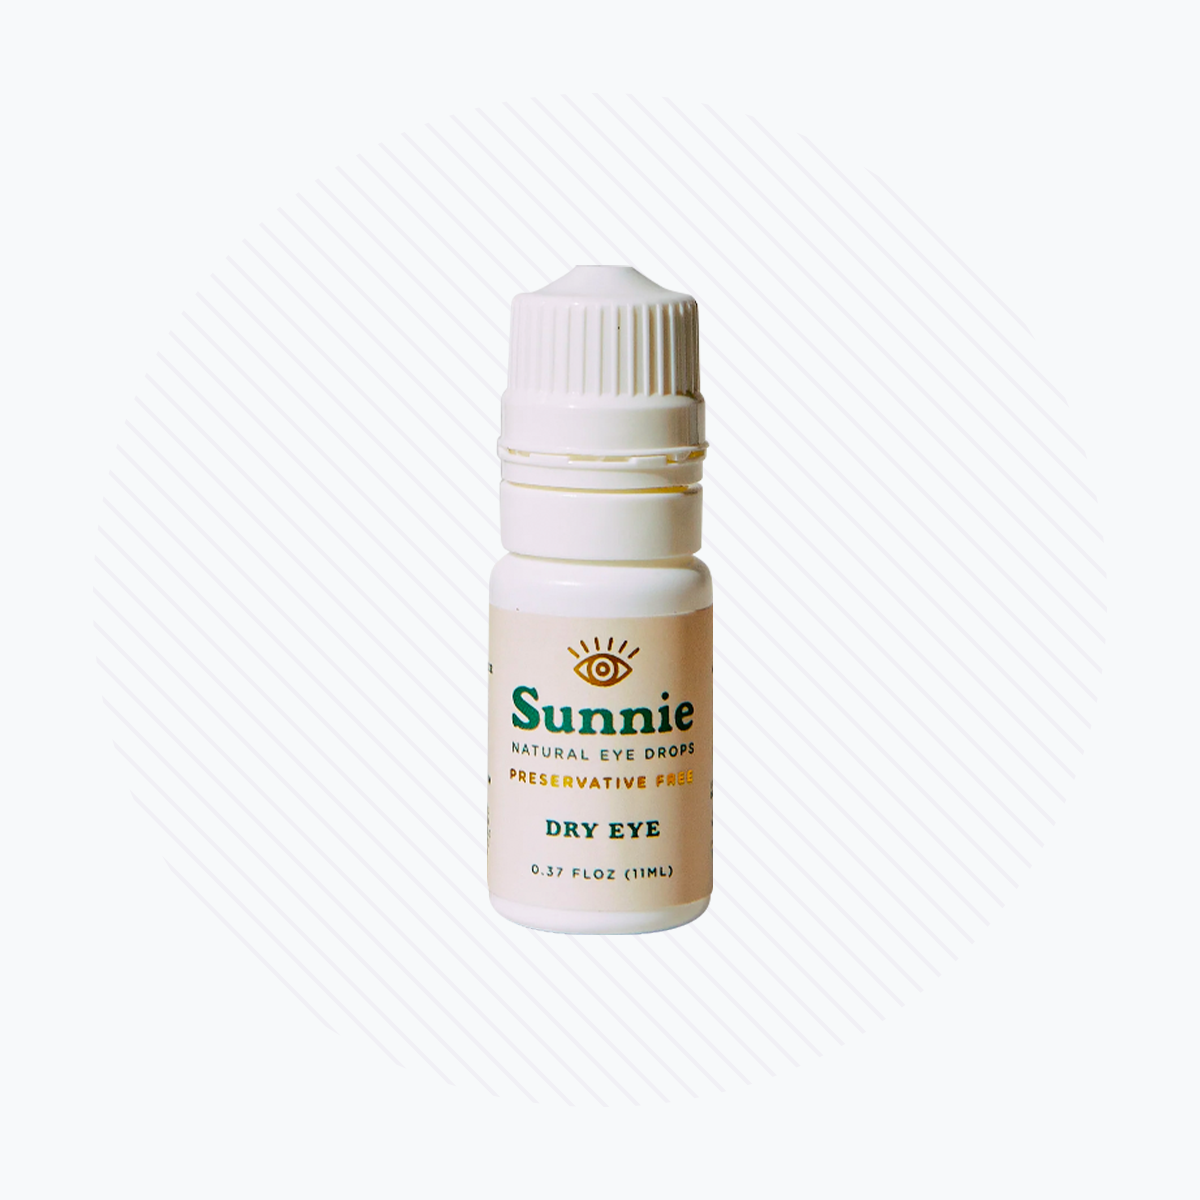 Natural Preservative Free Eye Drops for Dryness by Sunnie, 11mL Bottle (330+ Drops)